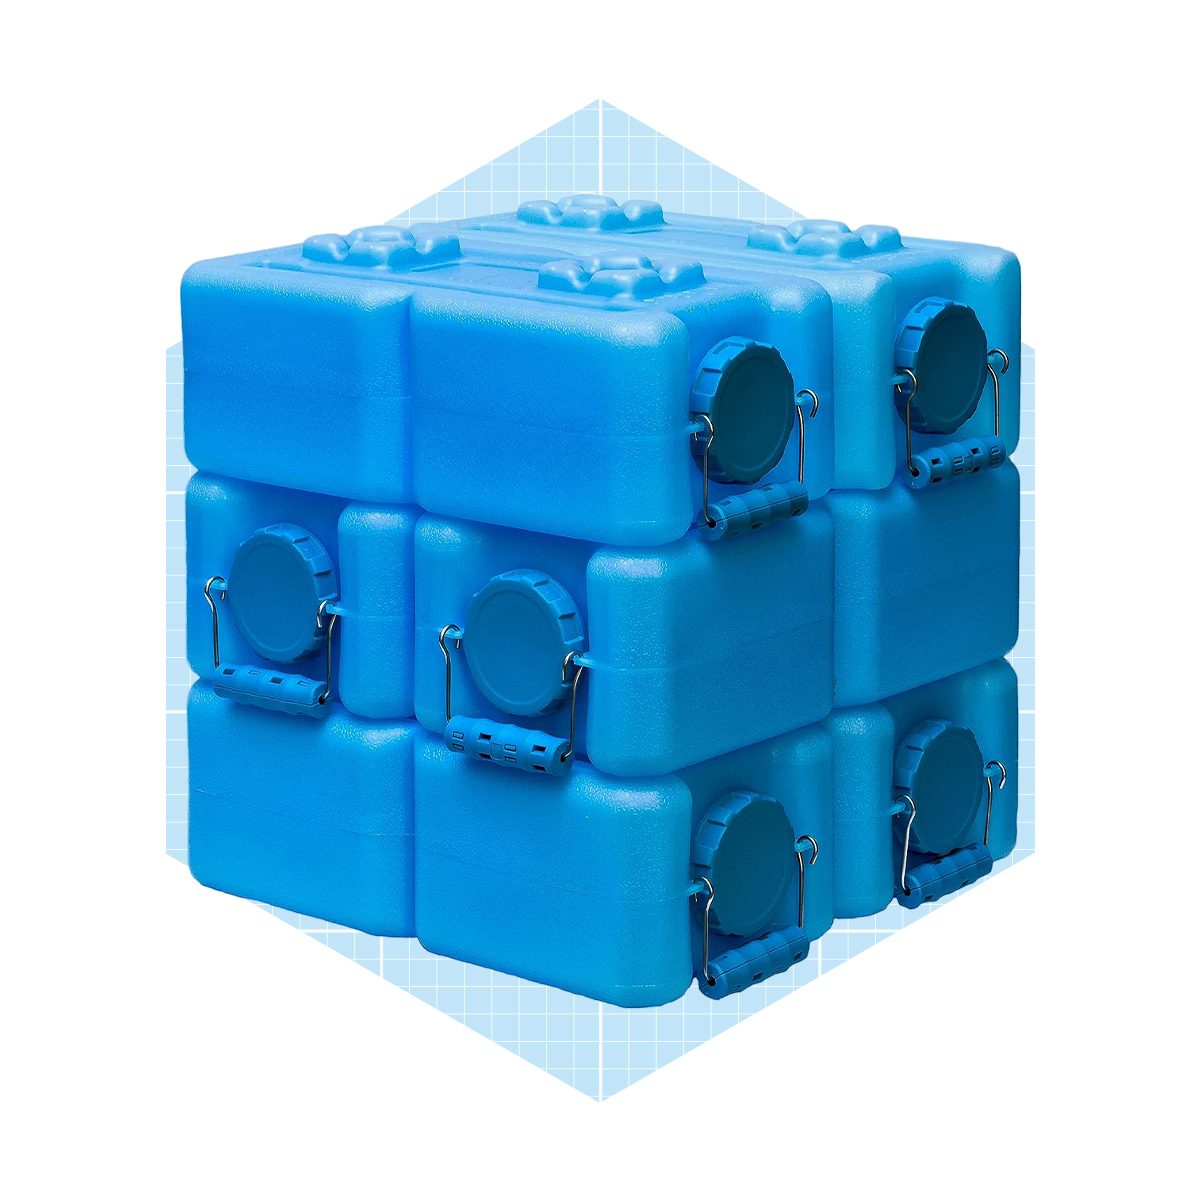 Best Emergency Water Storage Containers for Natural Disasters